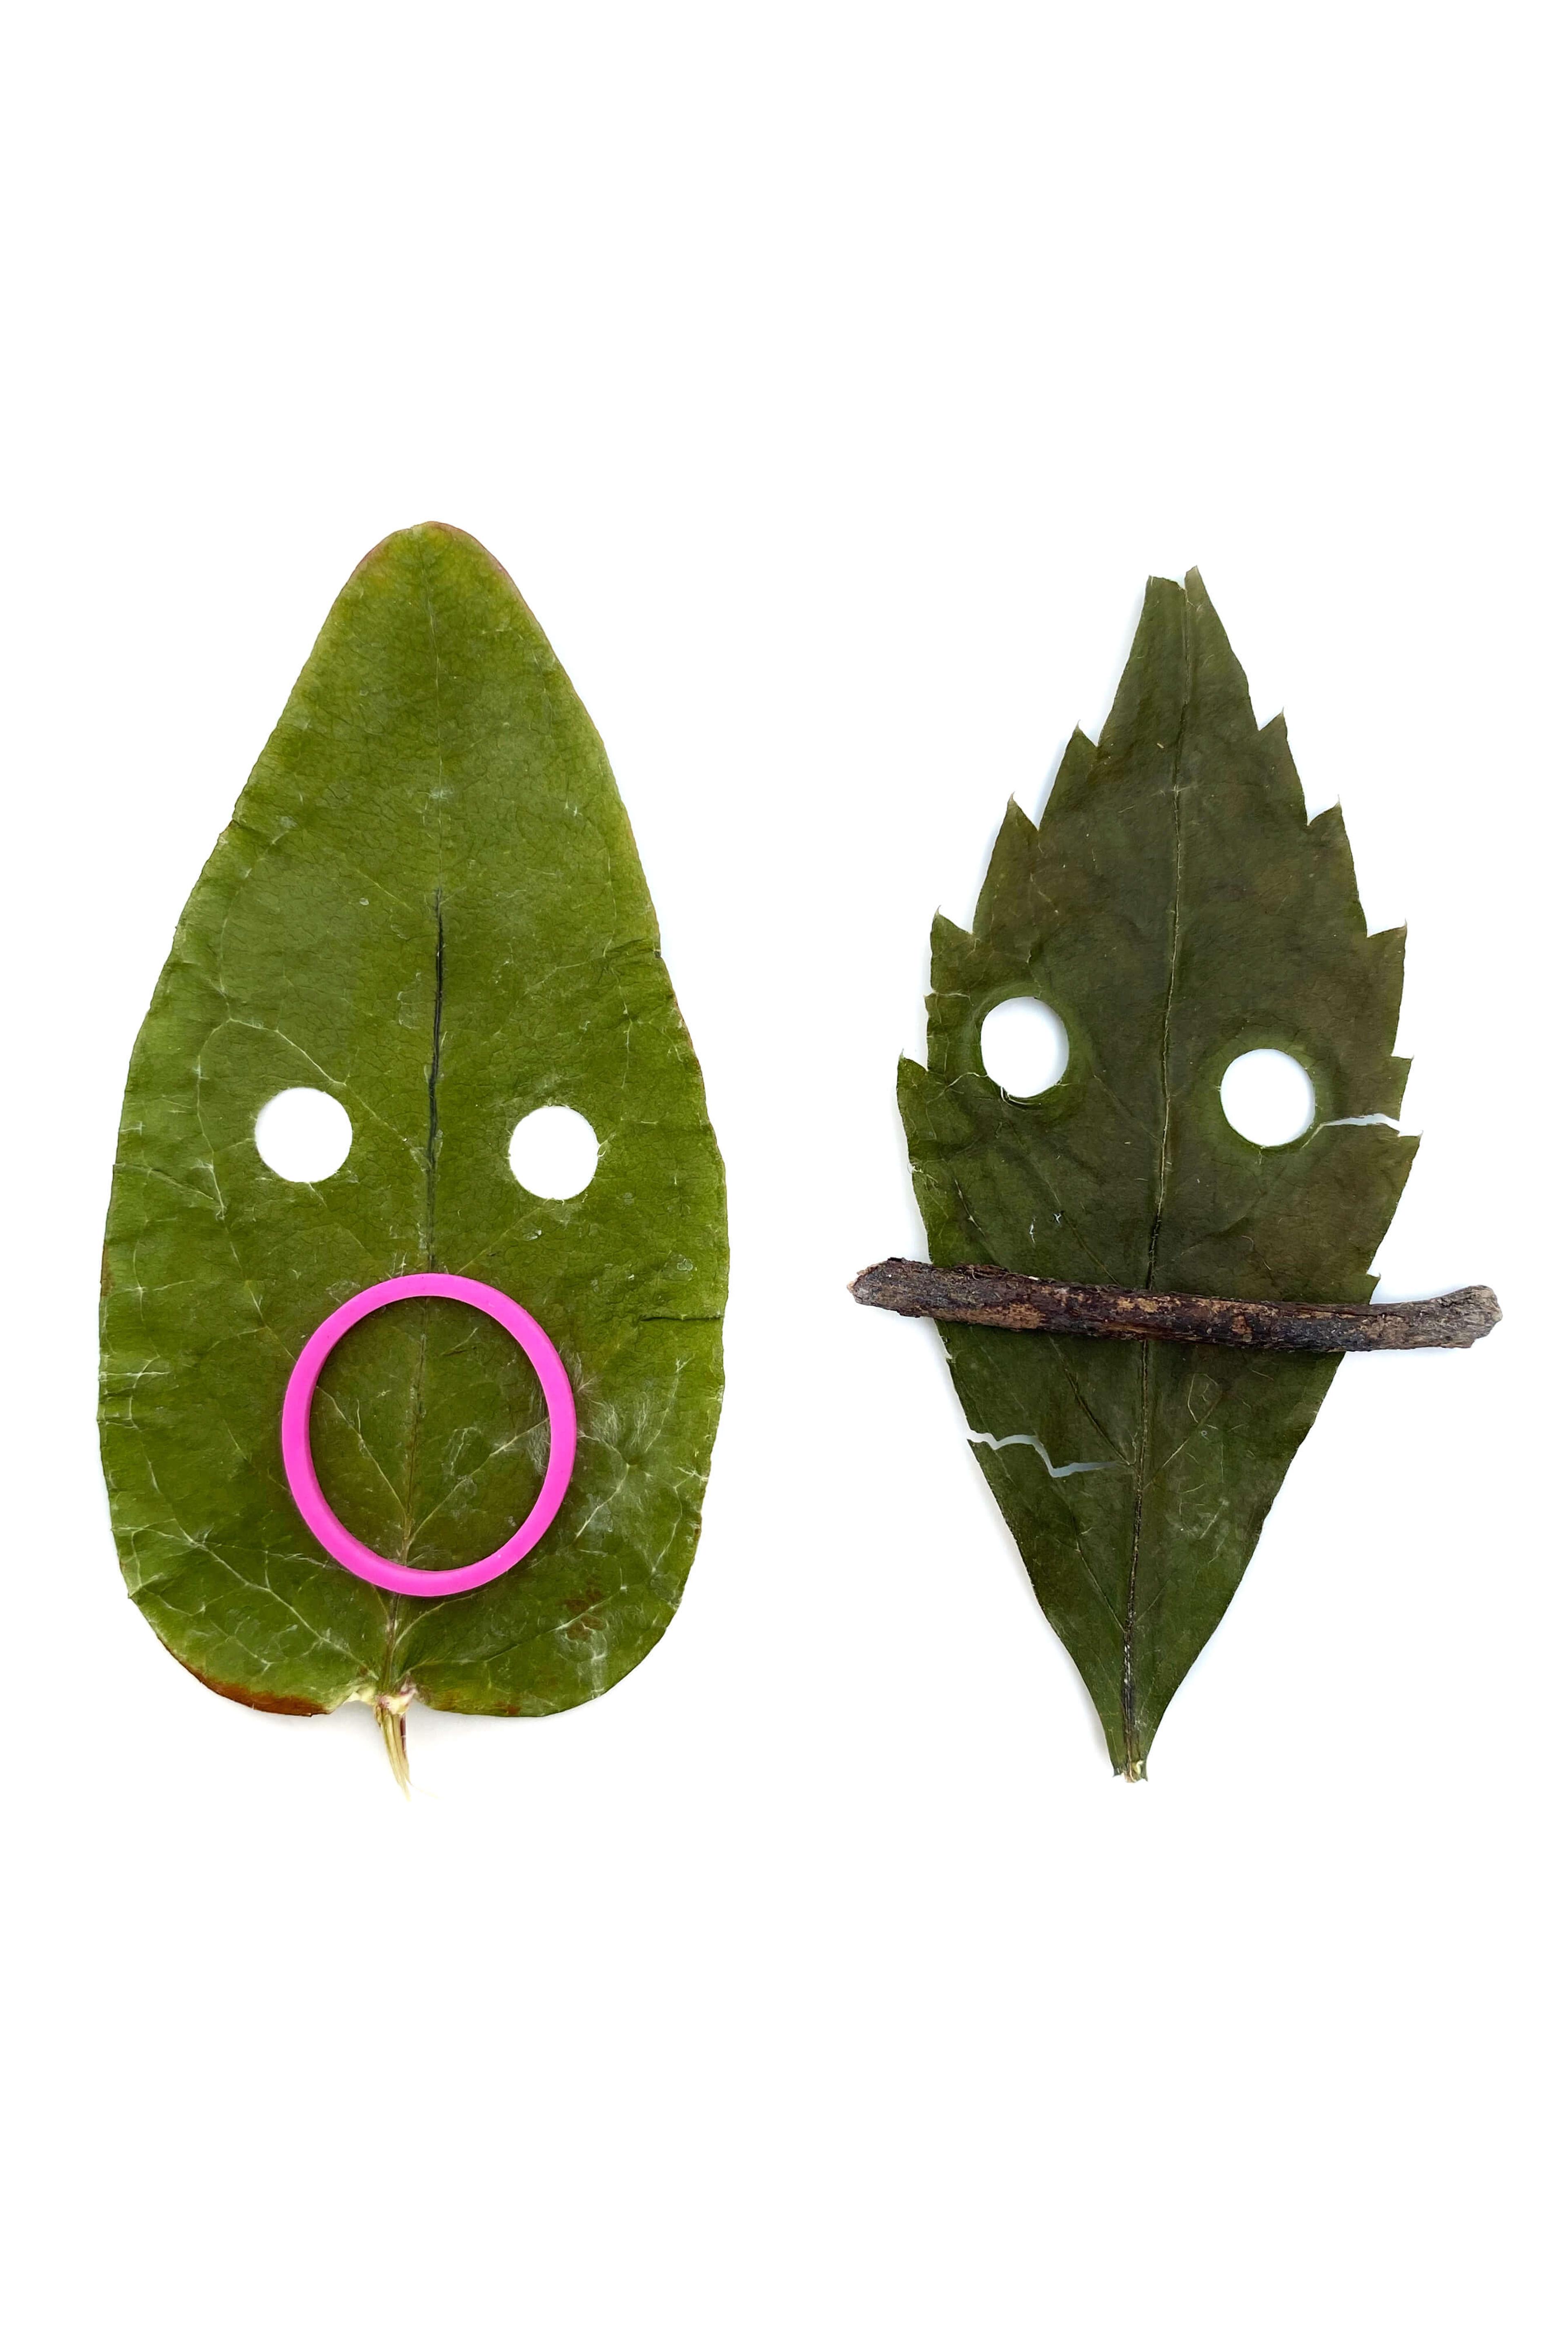 Two faces made from two leaves